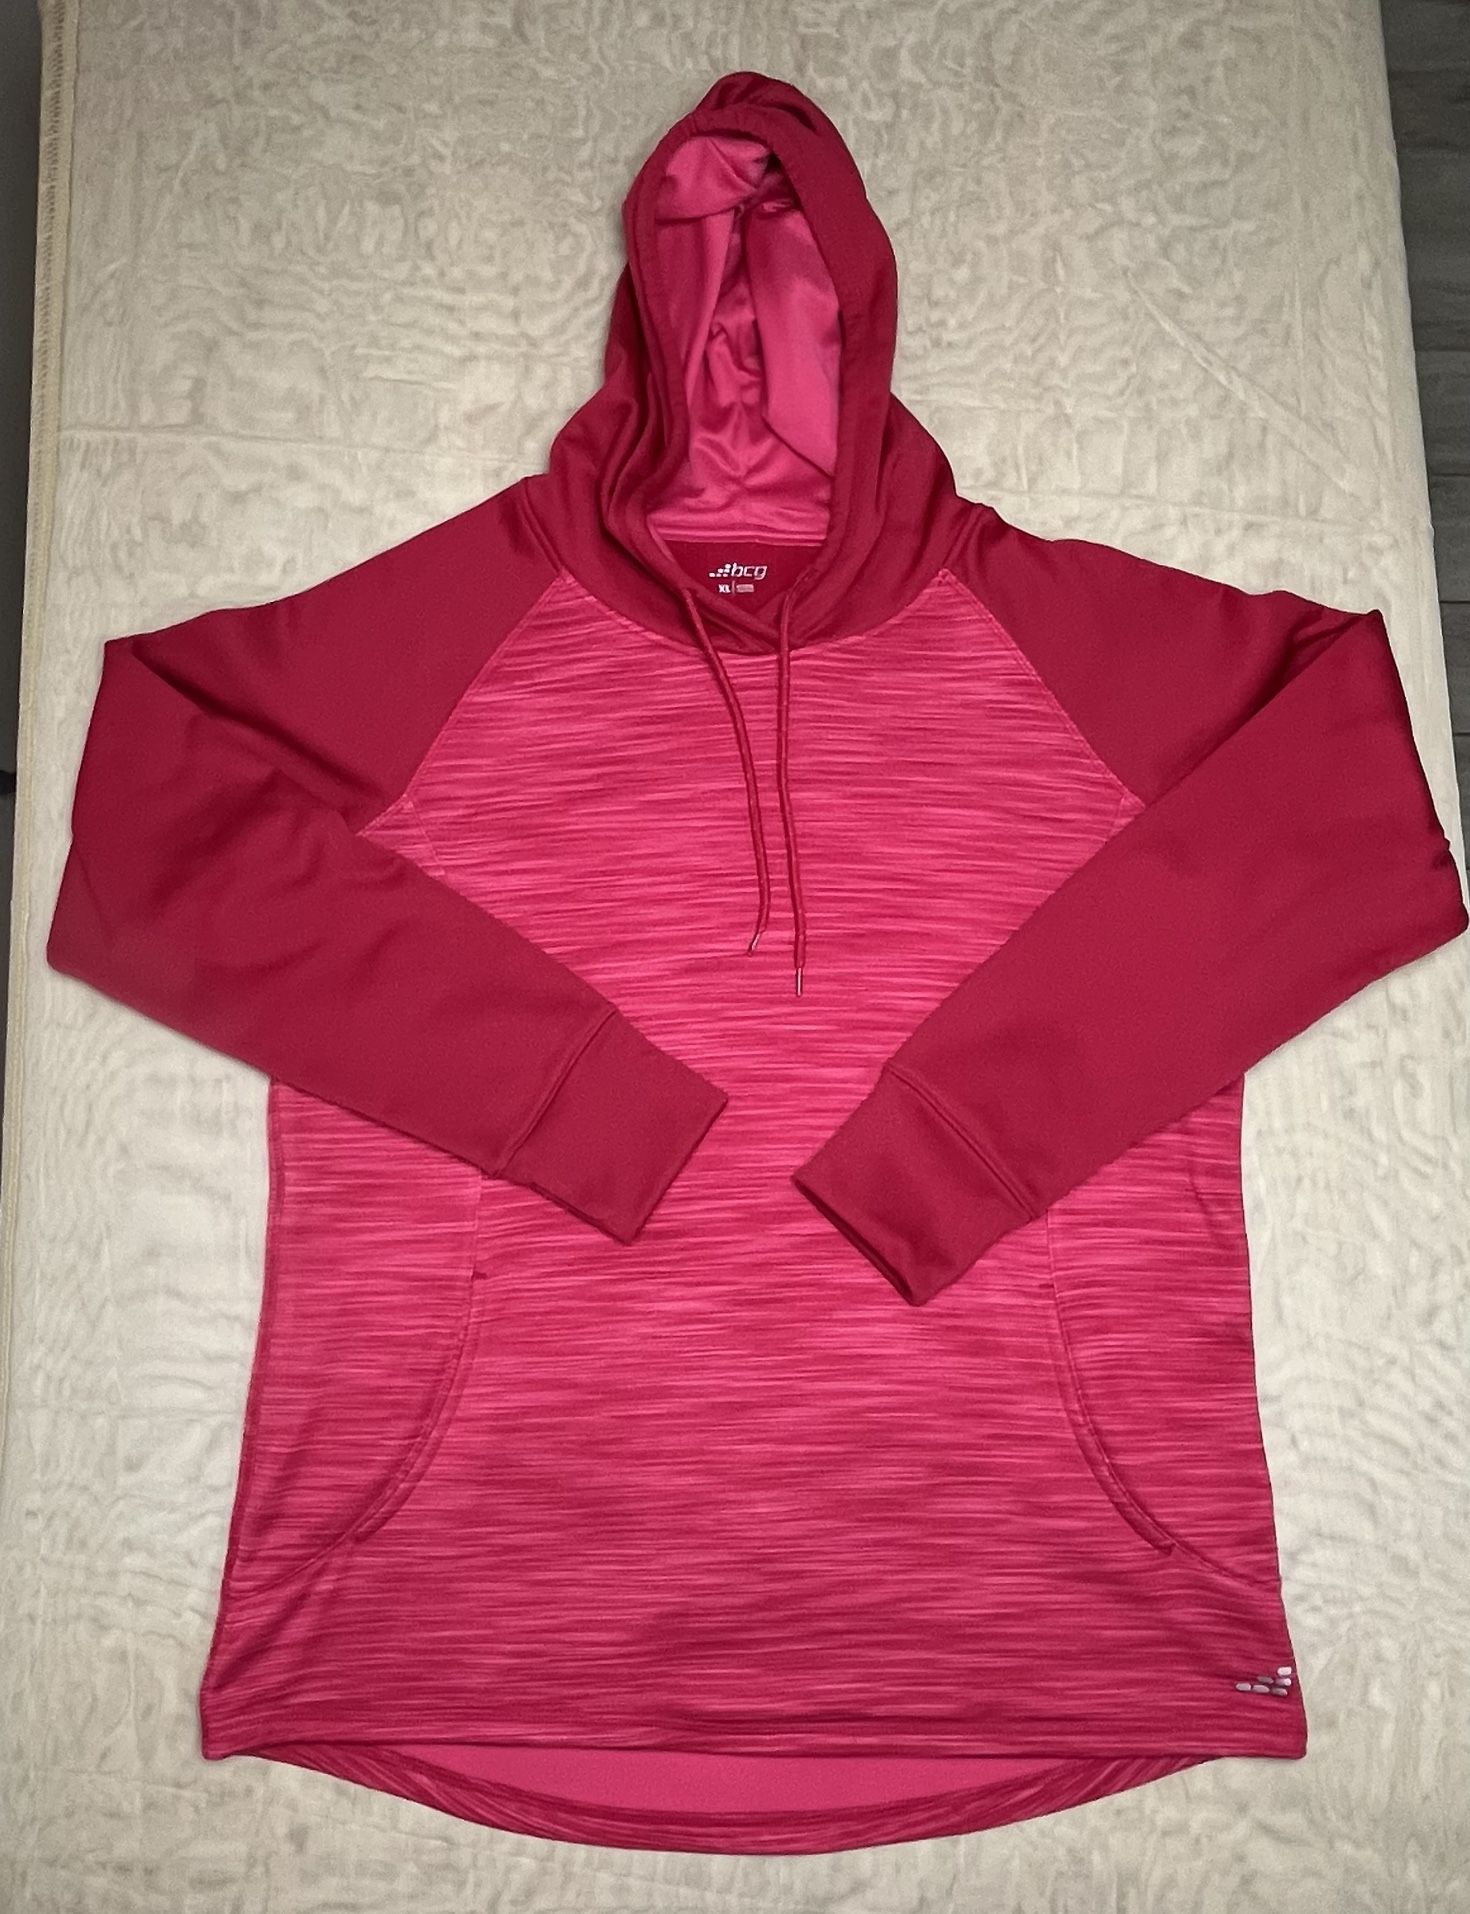 Hot pink athletic hoodie size XL women’s